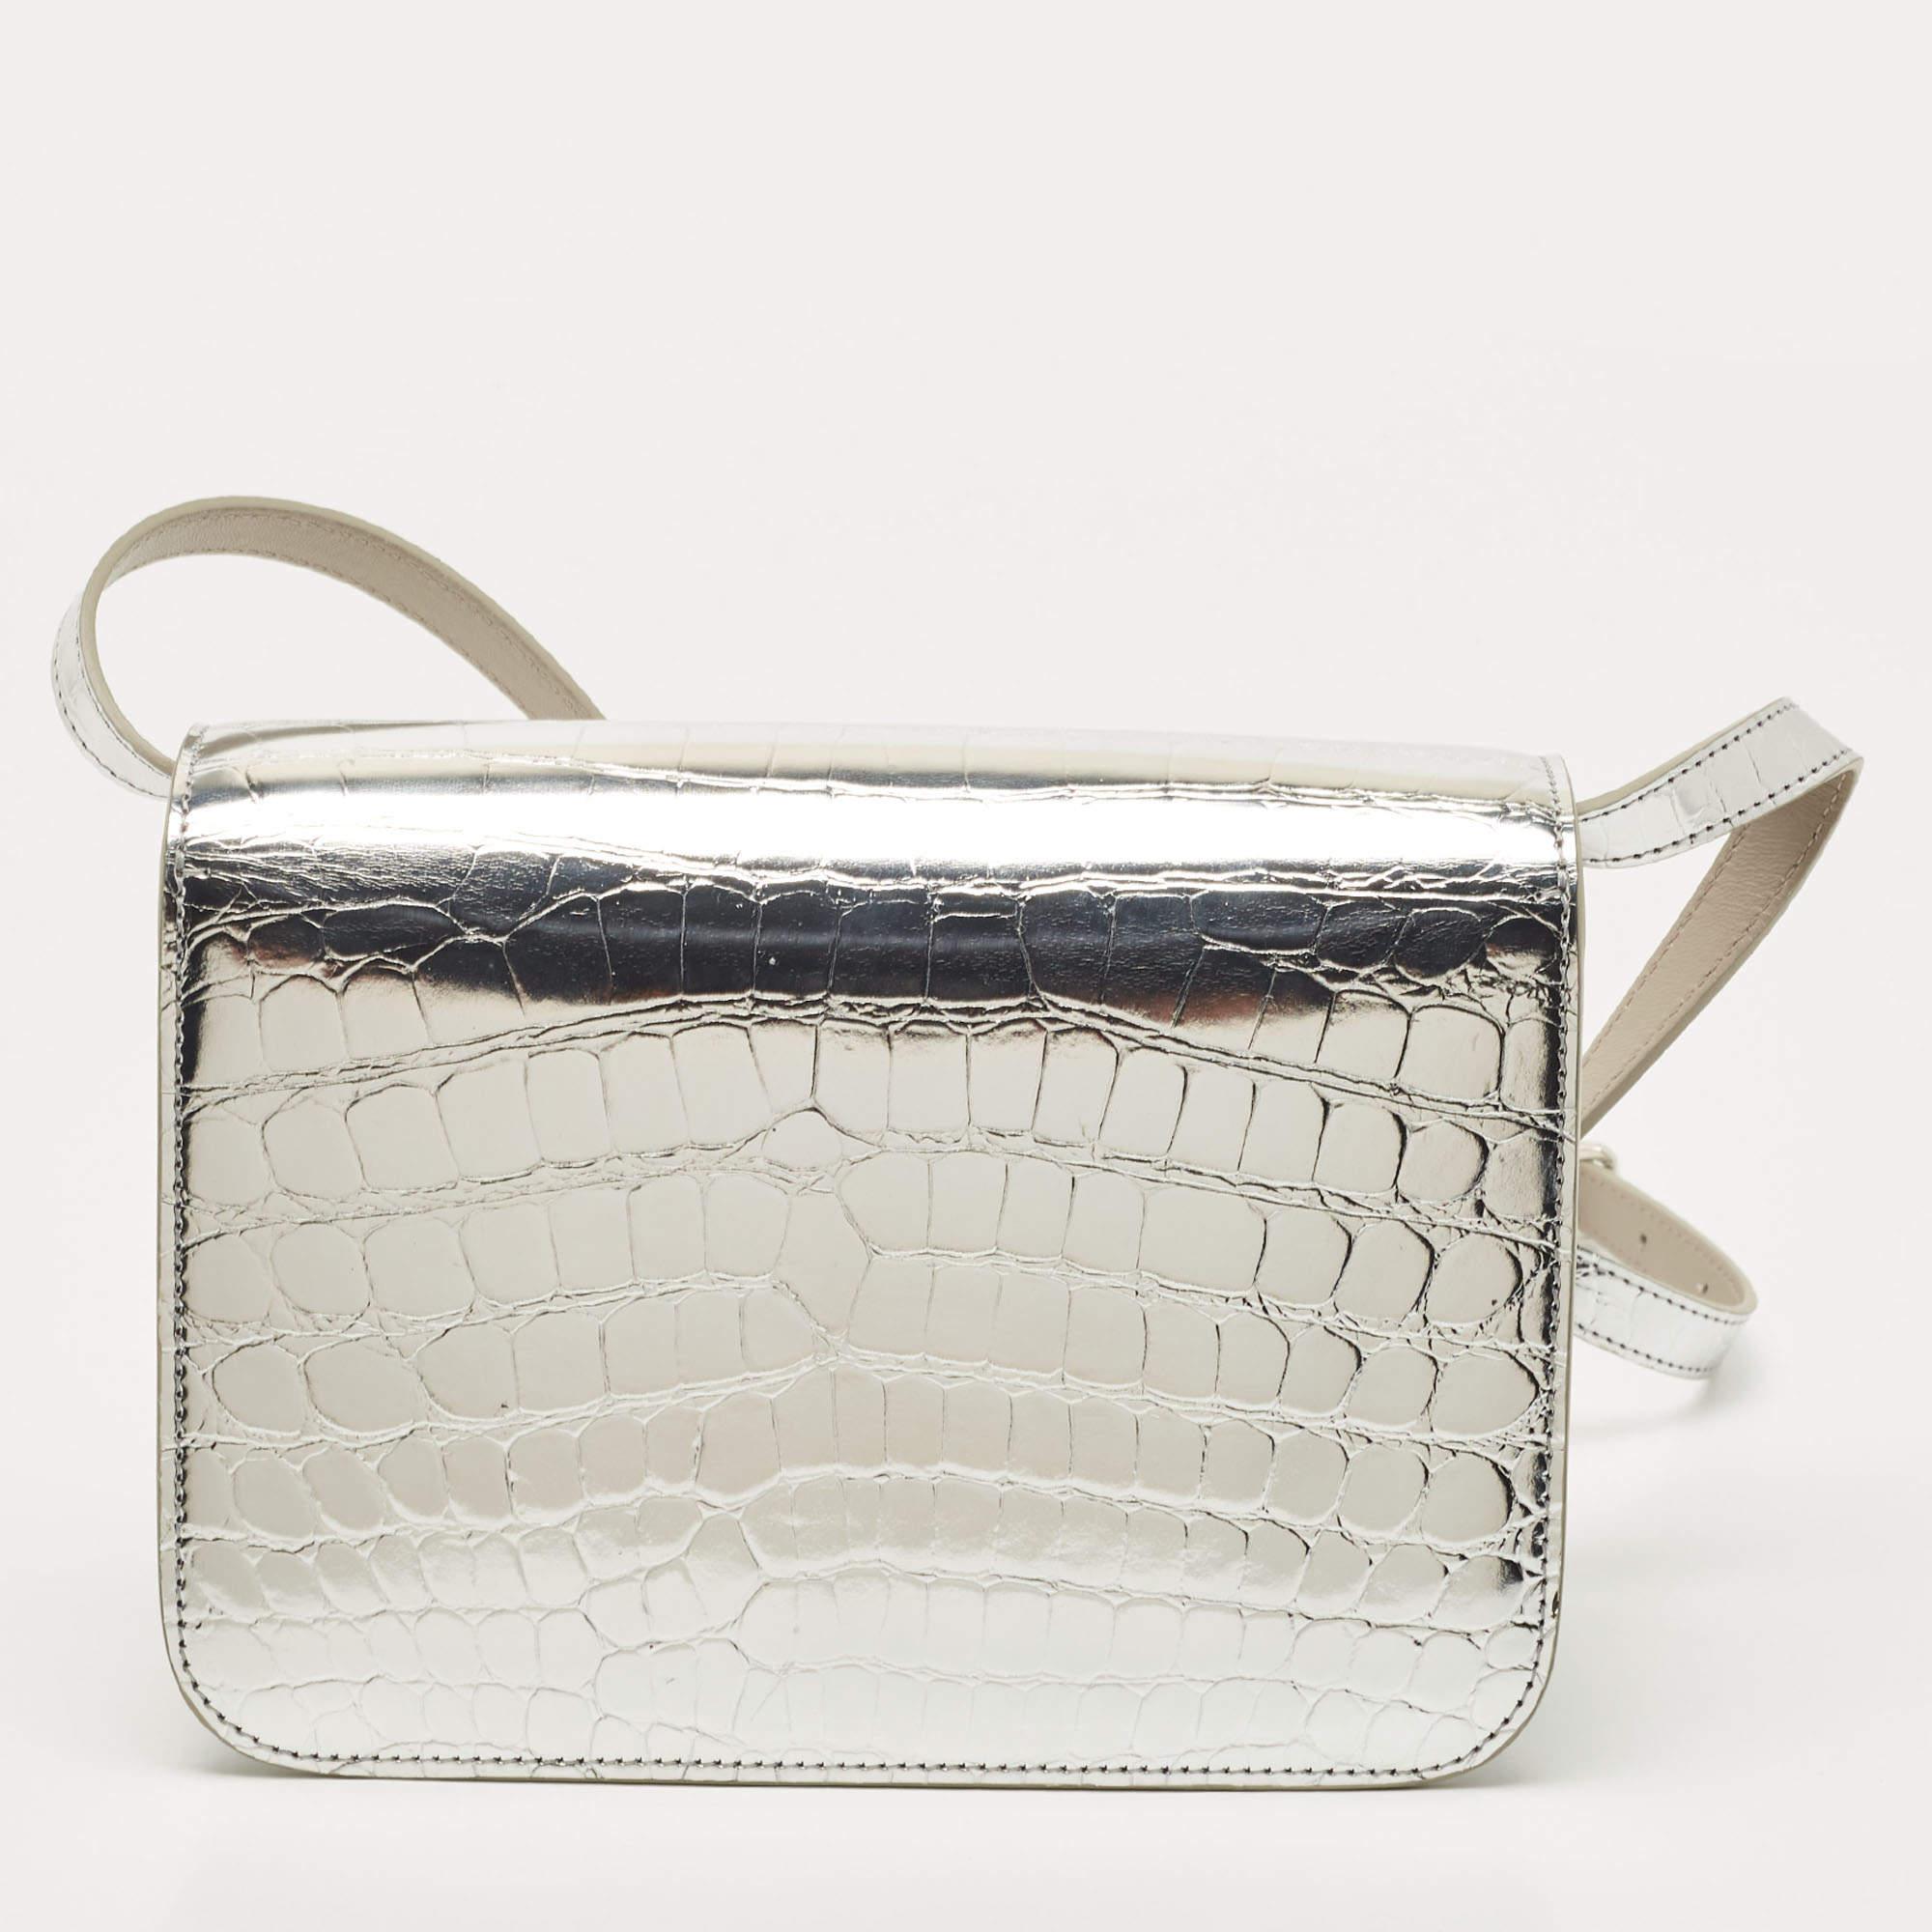 Burberry's leather shoulder bag is a knowing investment piece that's on-trend now, too. It's finished with an elegant silver-tone metal TB clasp as well as an adjustable shoulder strap, so it can be worn in a number of different ways. With more room